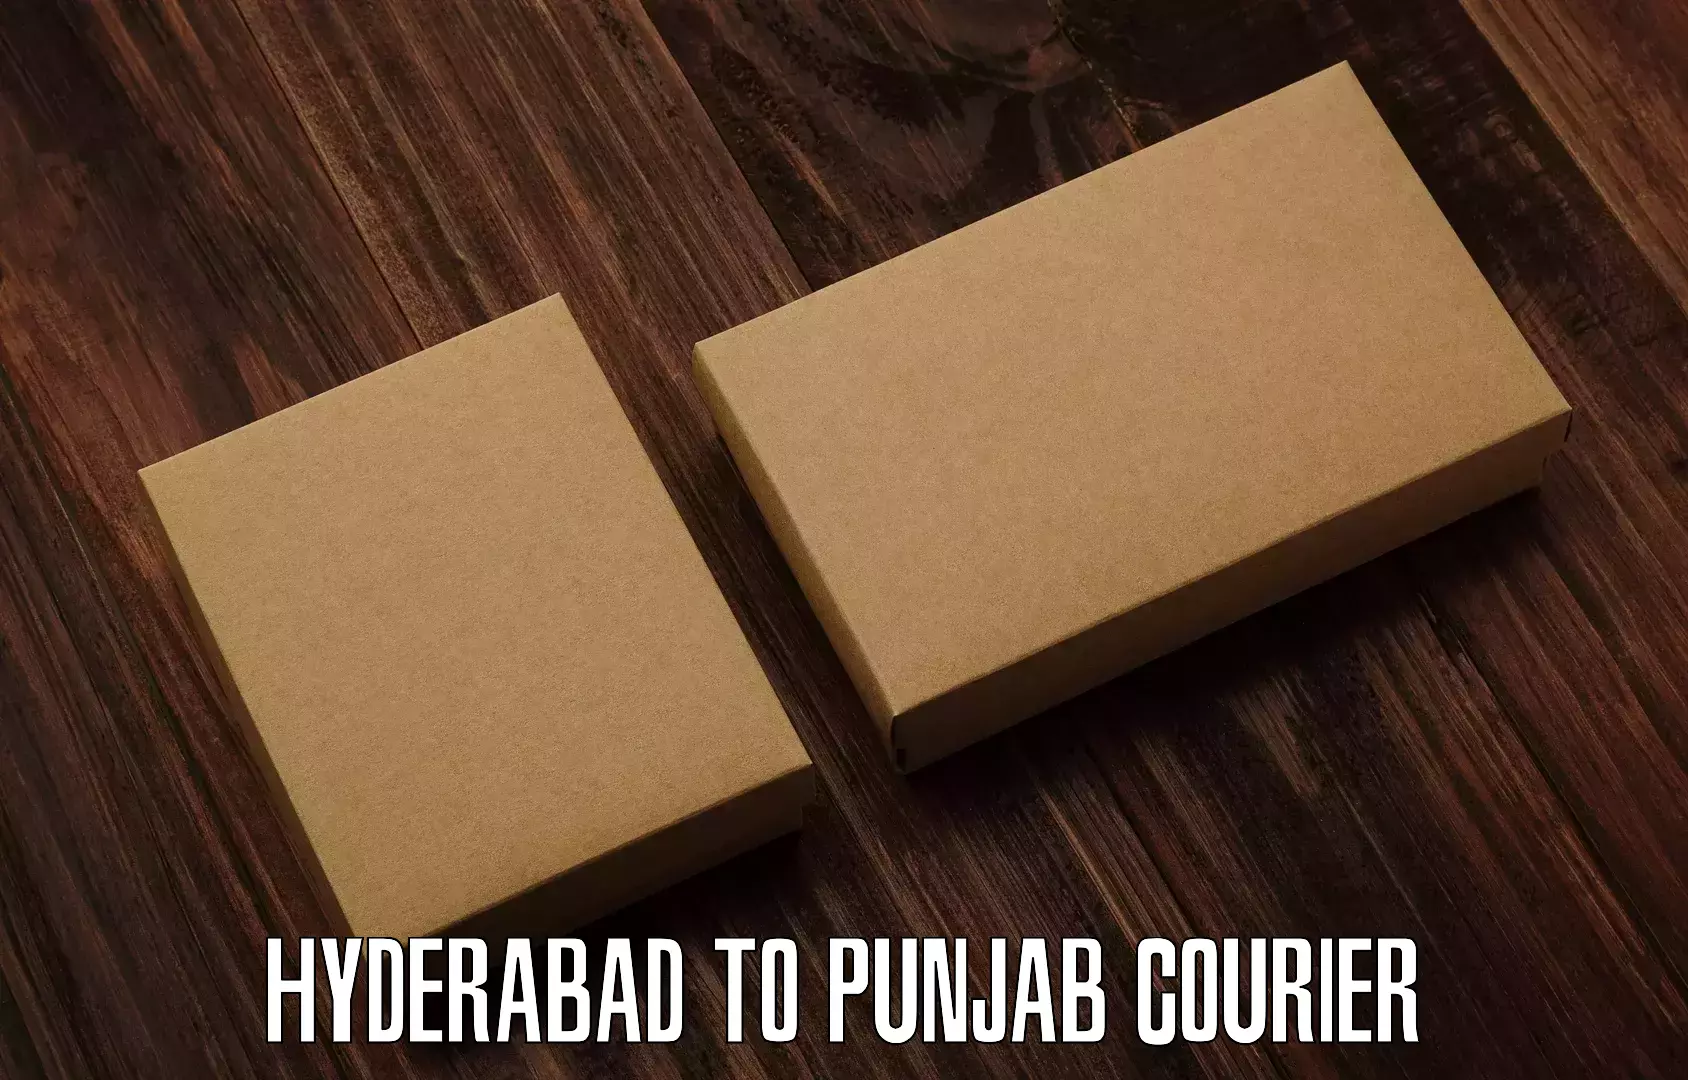 Bulk courier orders Hyderabad to Punjab